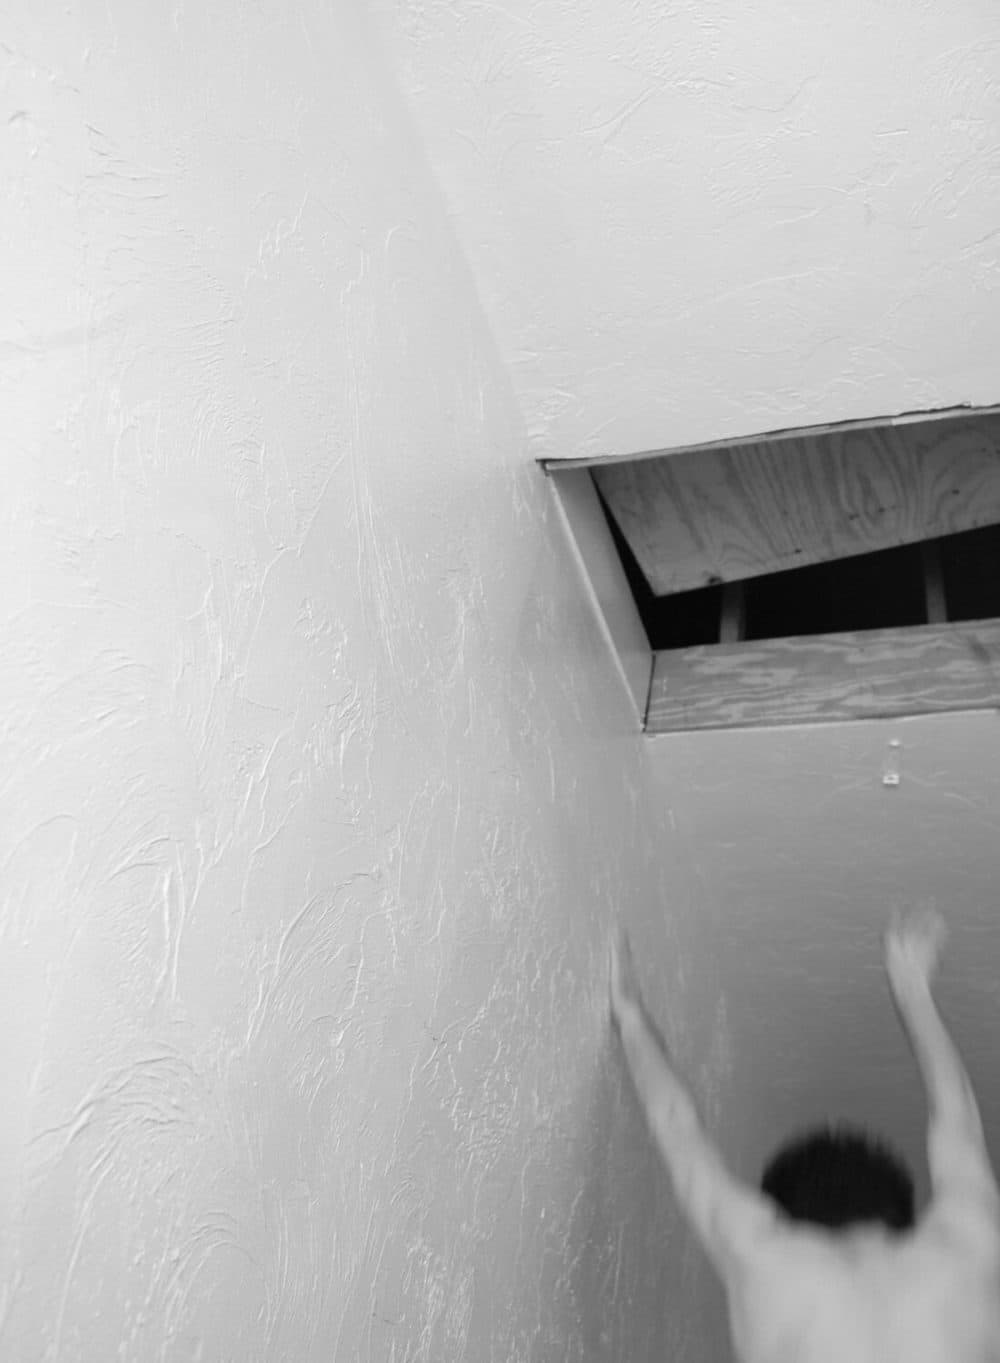 William Barriteau, “Attic,” 2019, digital black and white photograph. (Courtesy of the artist and Re-Direct Gallery)